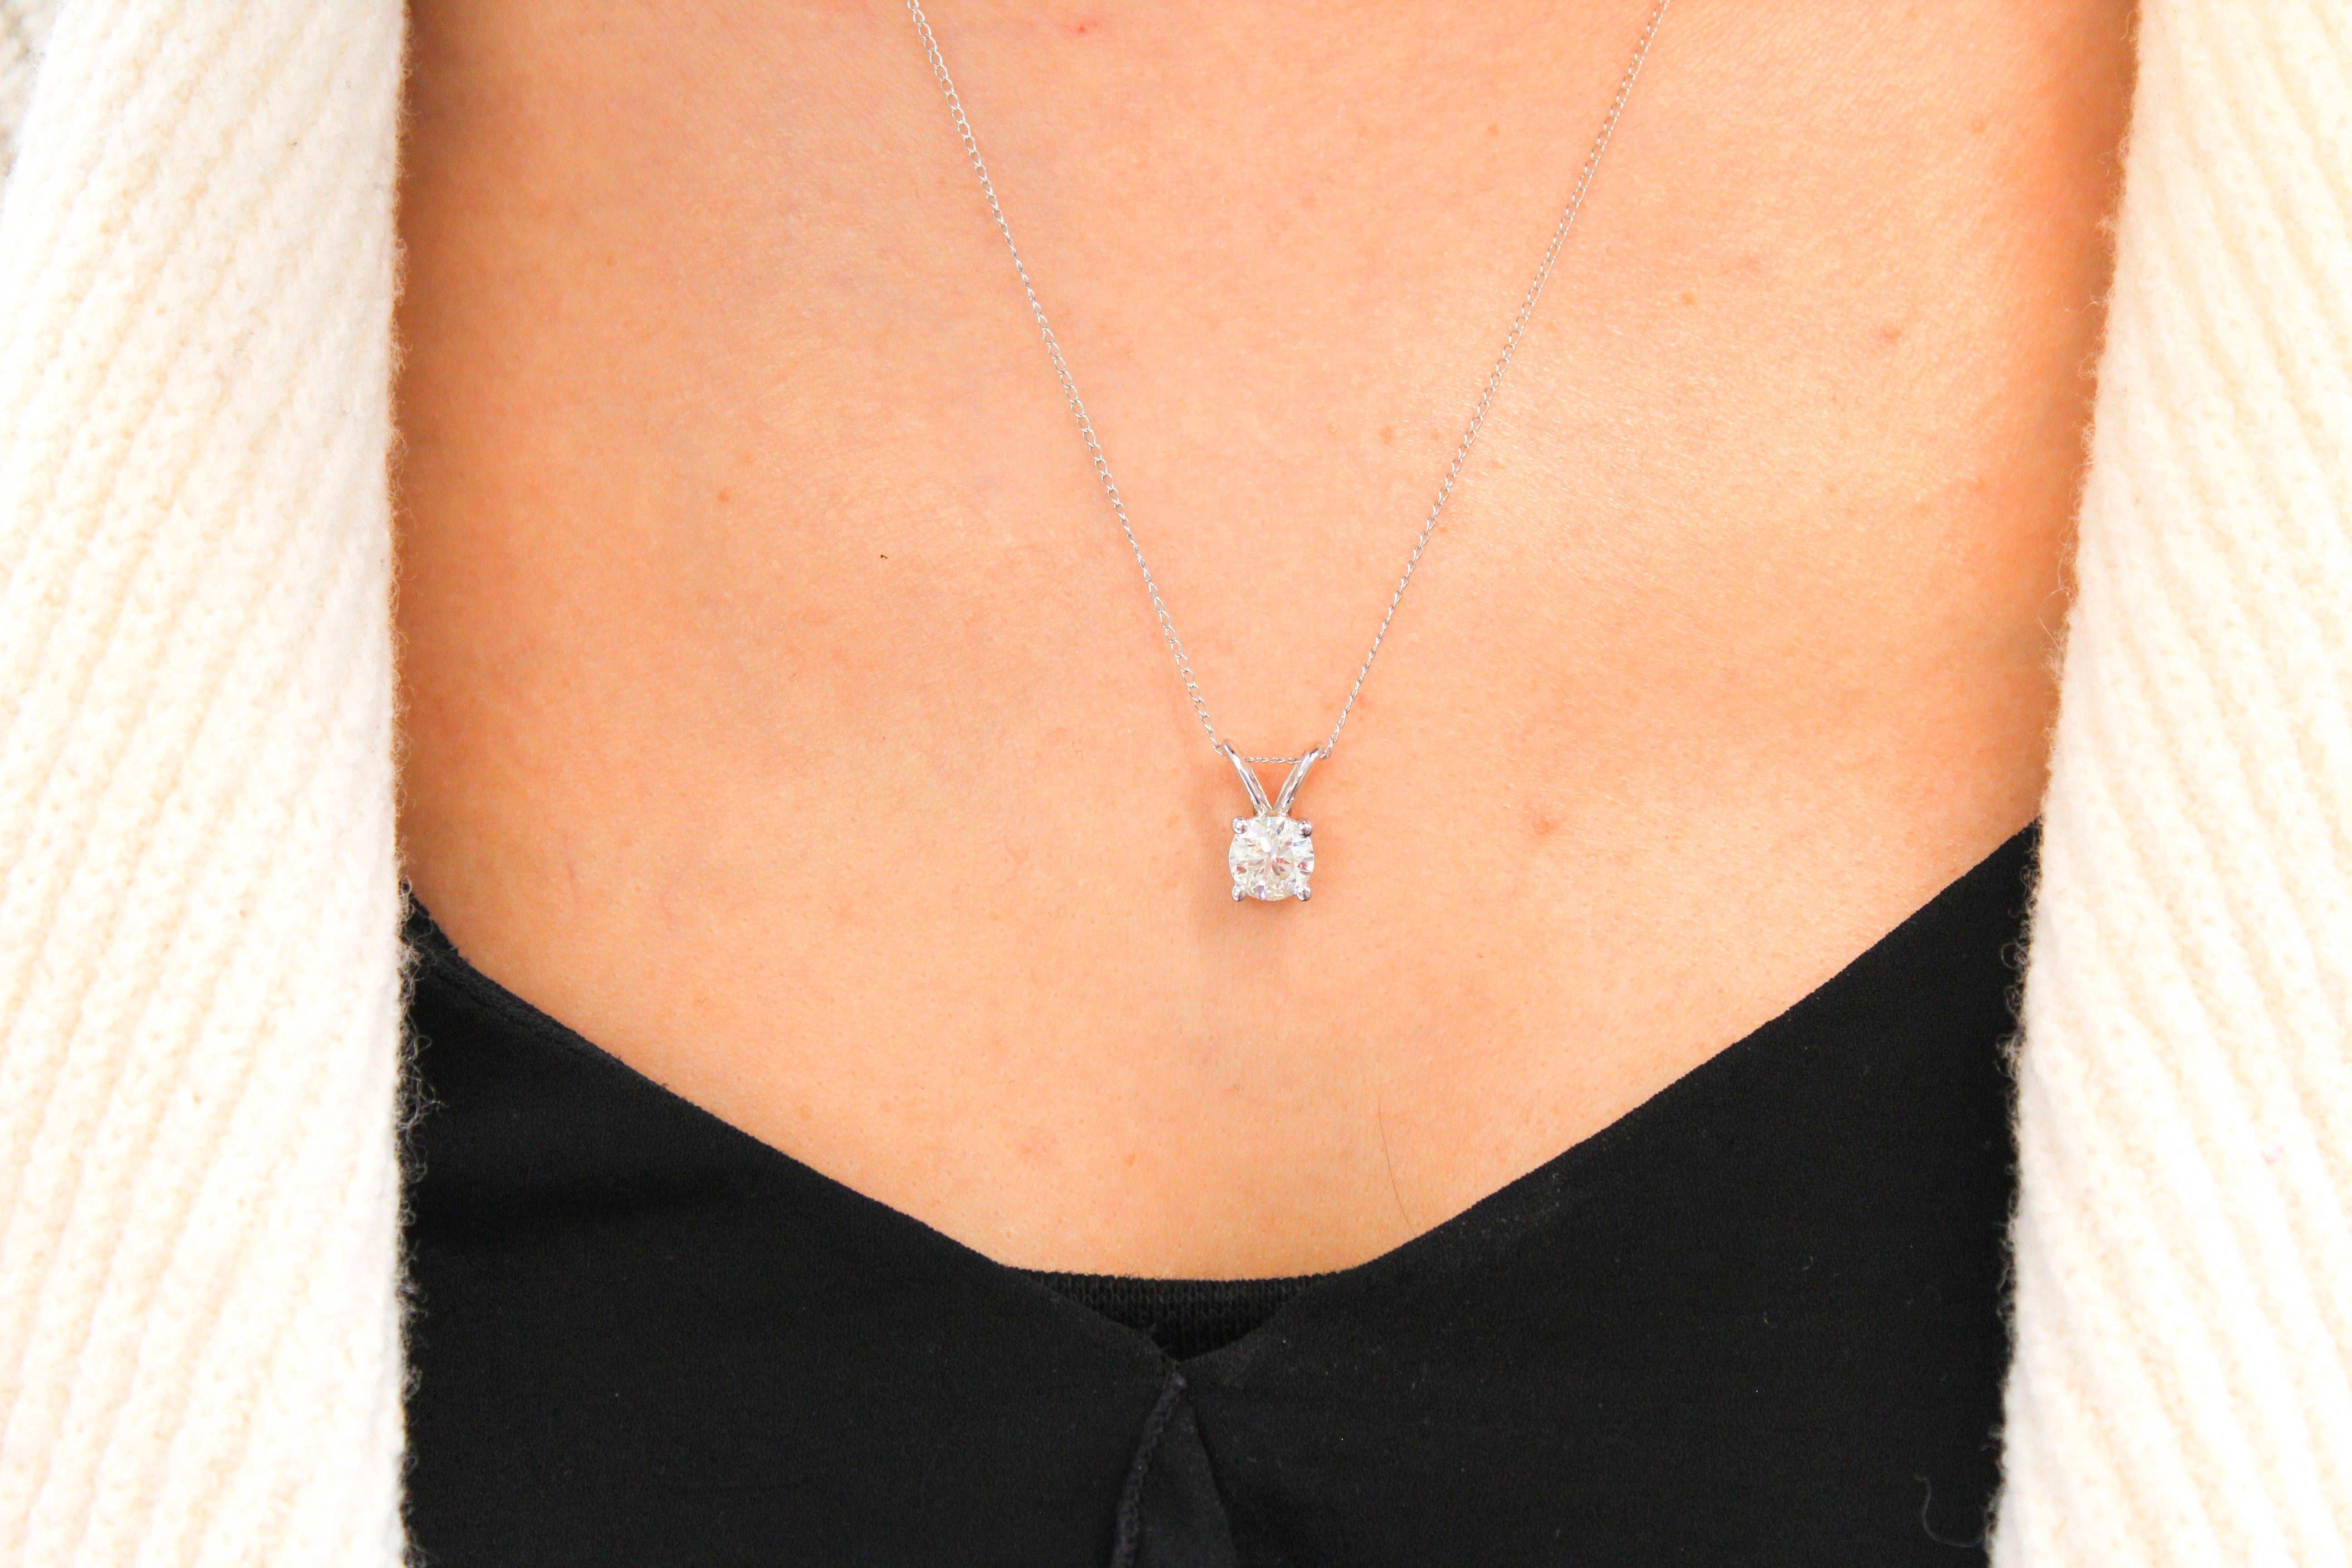 This impressive diamond solitaire pendant is finely crafted in brightly polished 14 karat white gold and features a round shaped 1.25 carat diamond that has SI clarity, gracefully prong set on a shiny split bail. Ideal as an anniversary or birthday